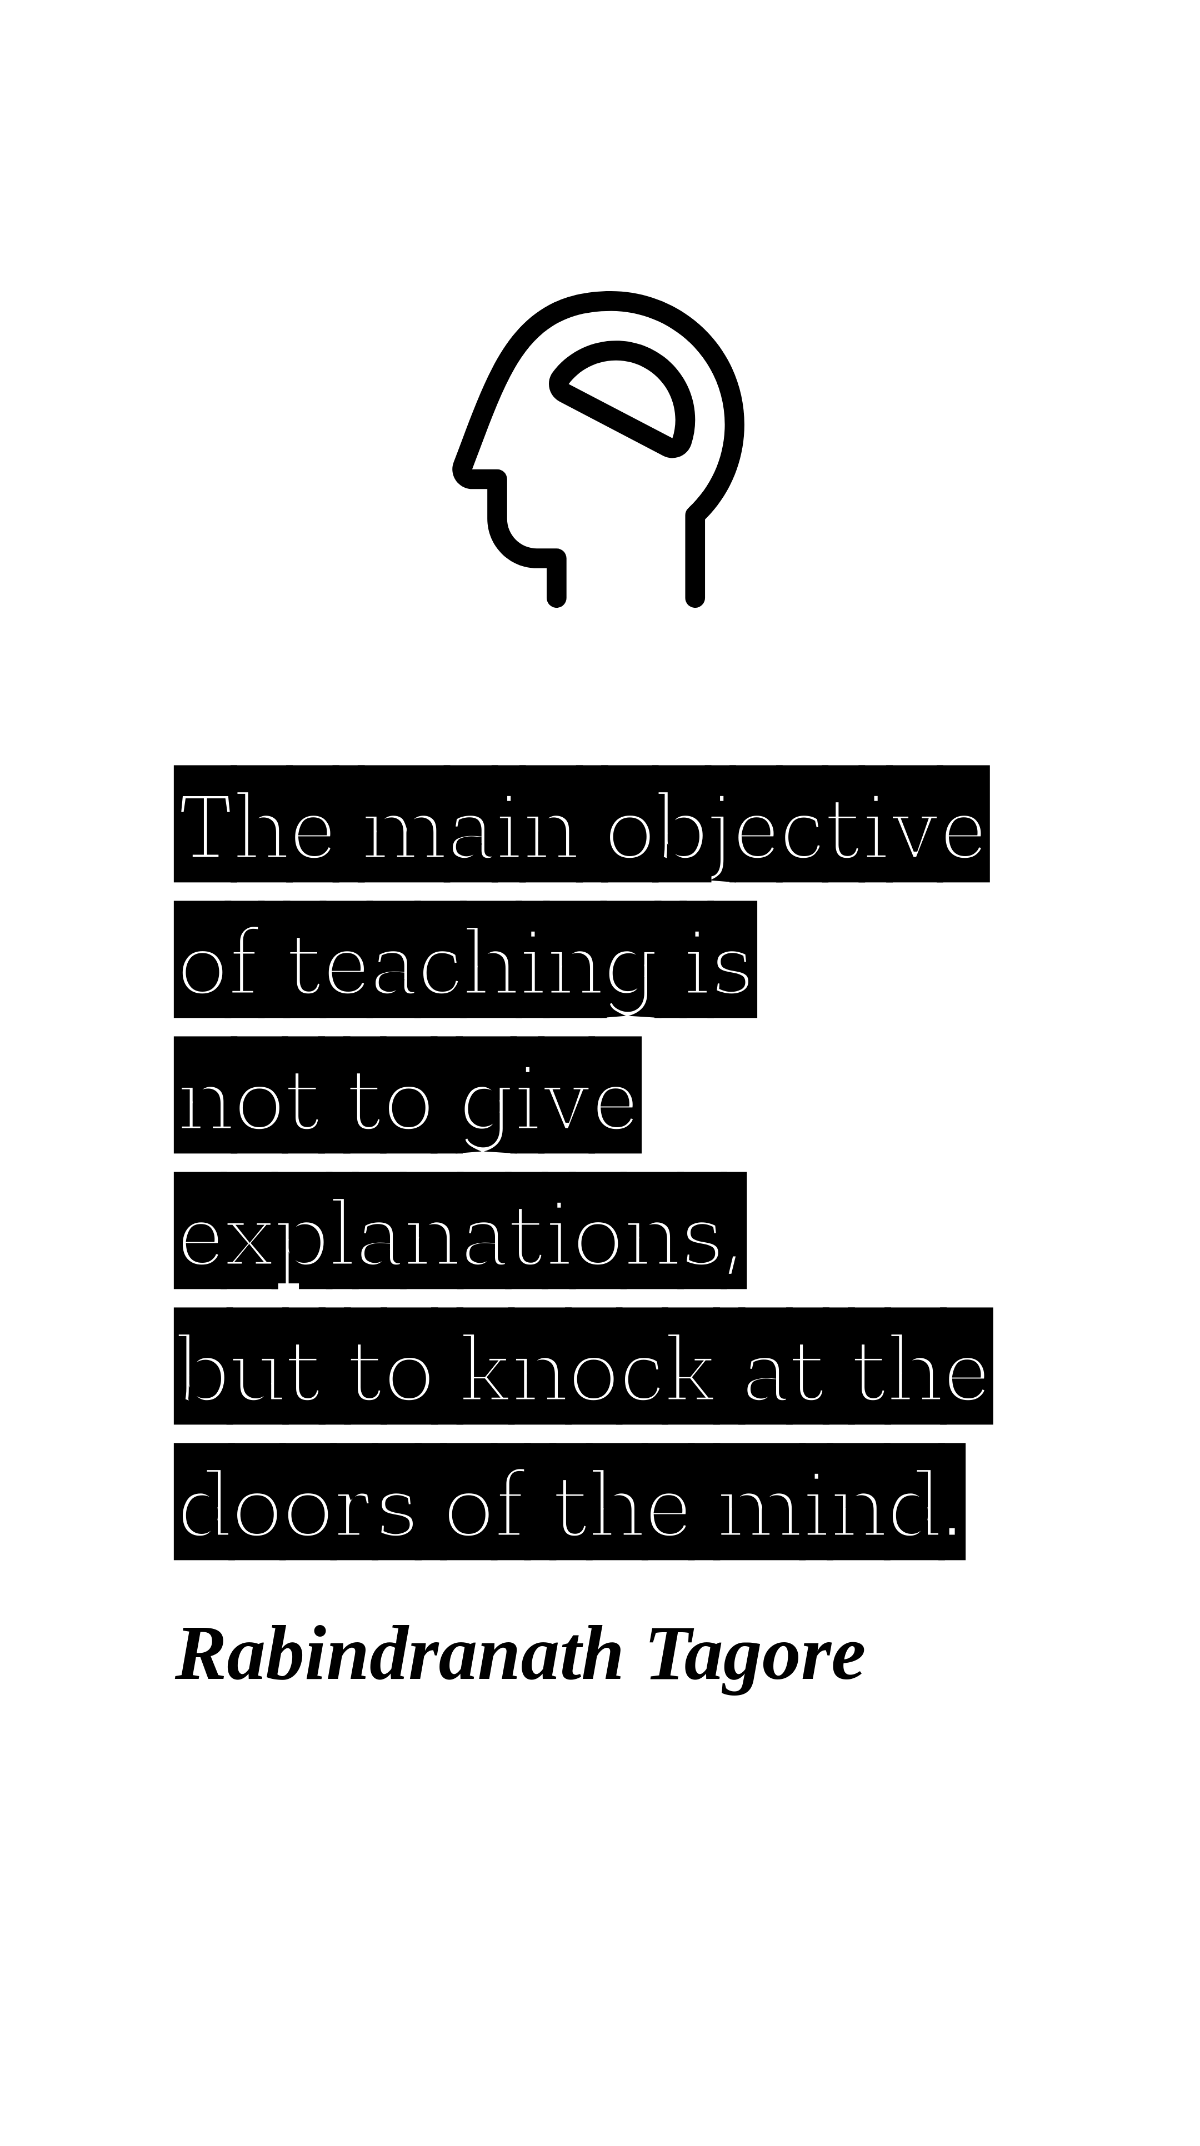 Free Rabindranath Tagore - The main objective of teaching is not to give explanations, but to knock at the doors of the mind. Template